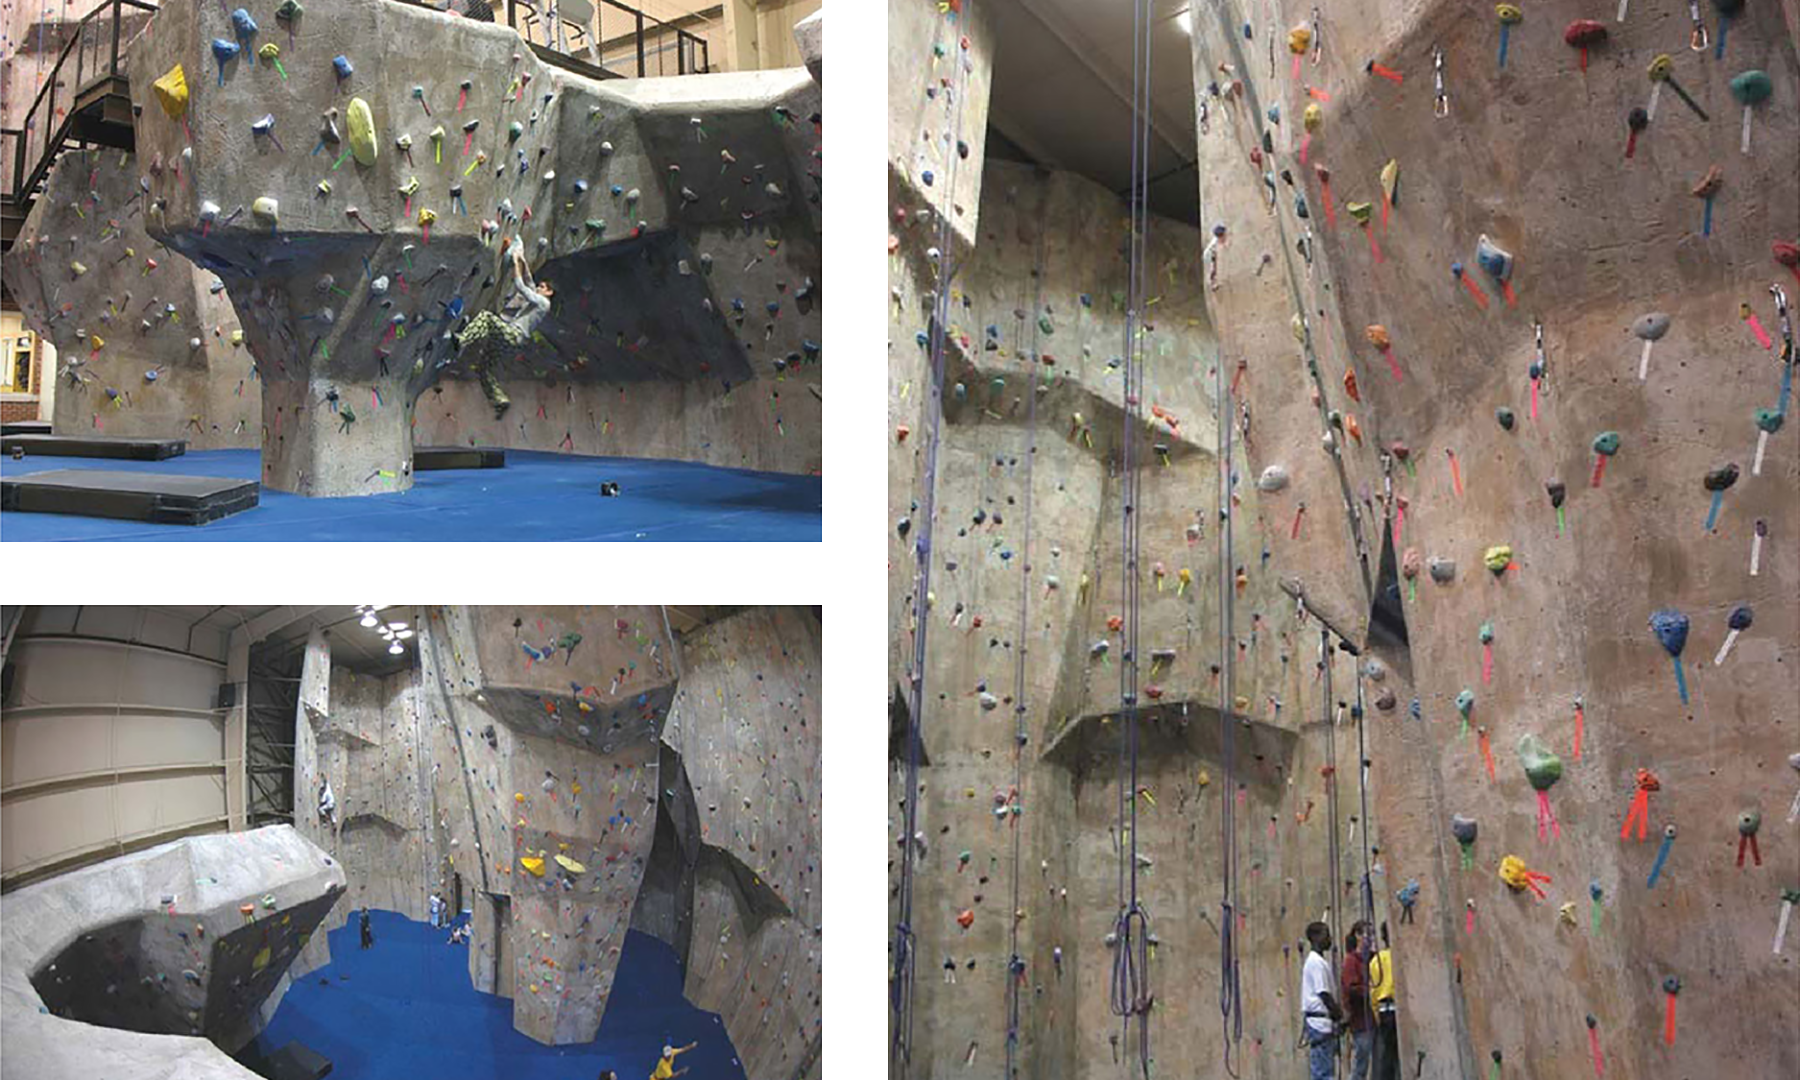 The Cliffs indoor climbing experience with views of the climbing and training walls.